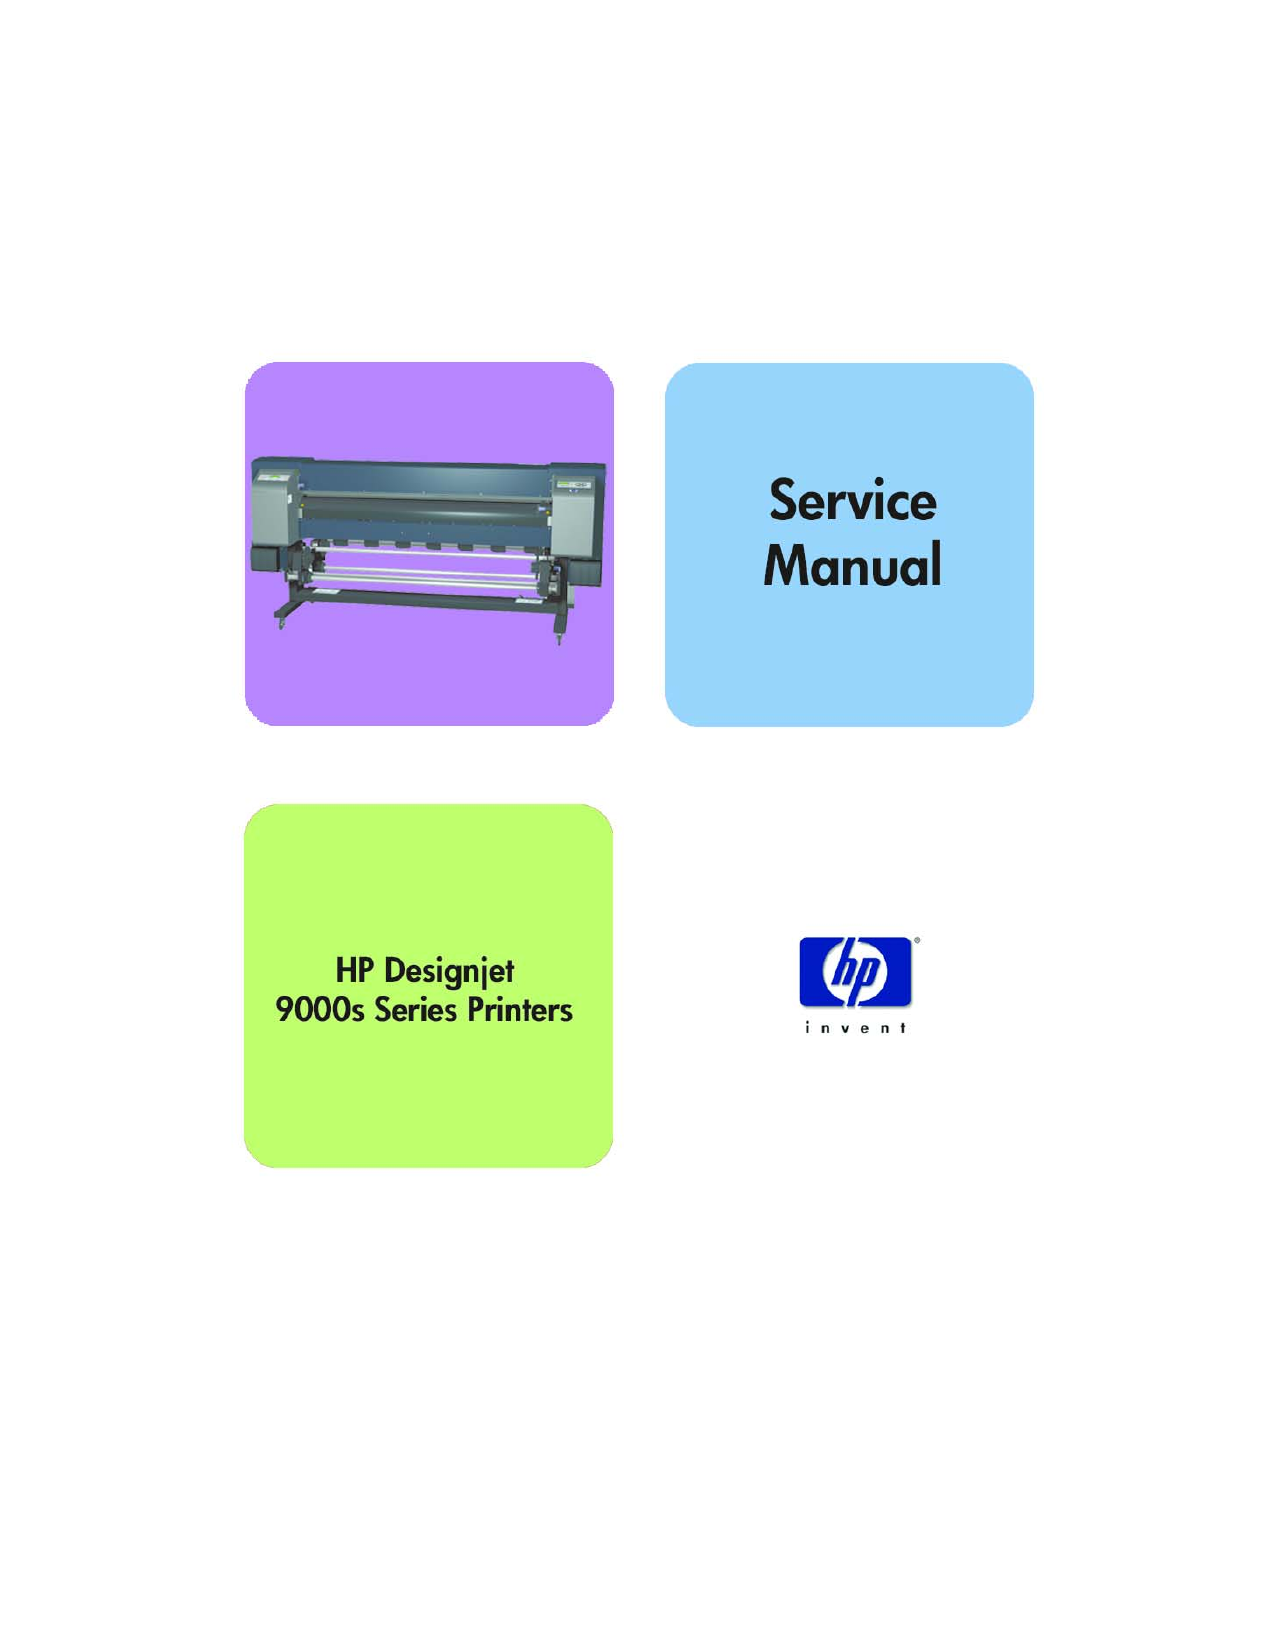 HP Designjet 9000S service guide Preview image 1